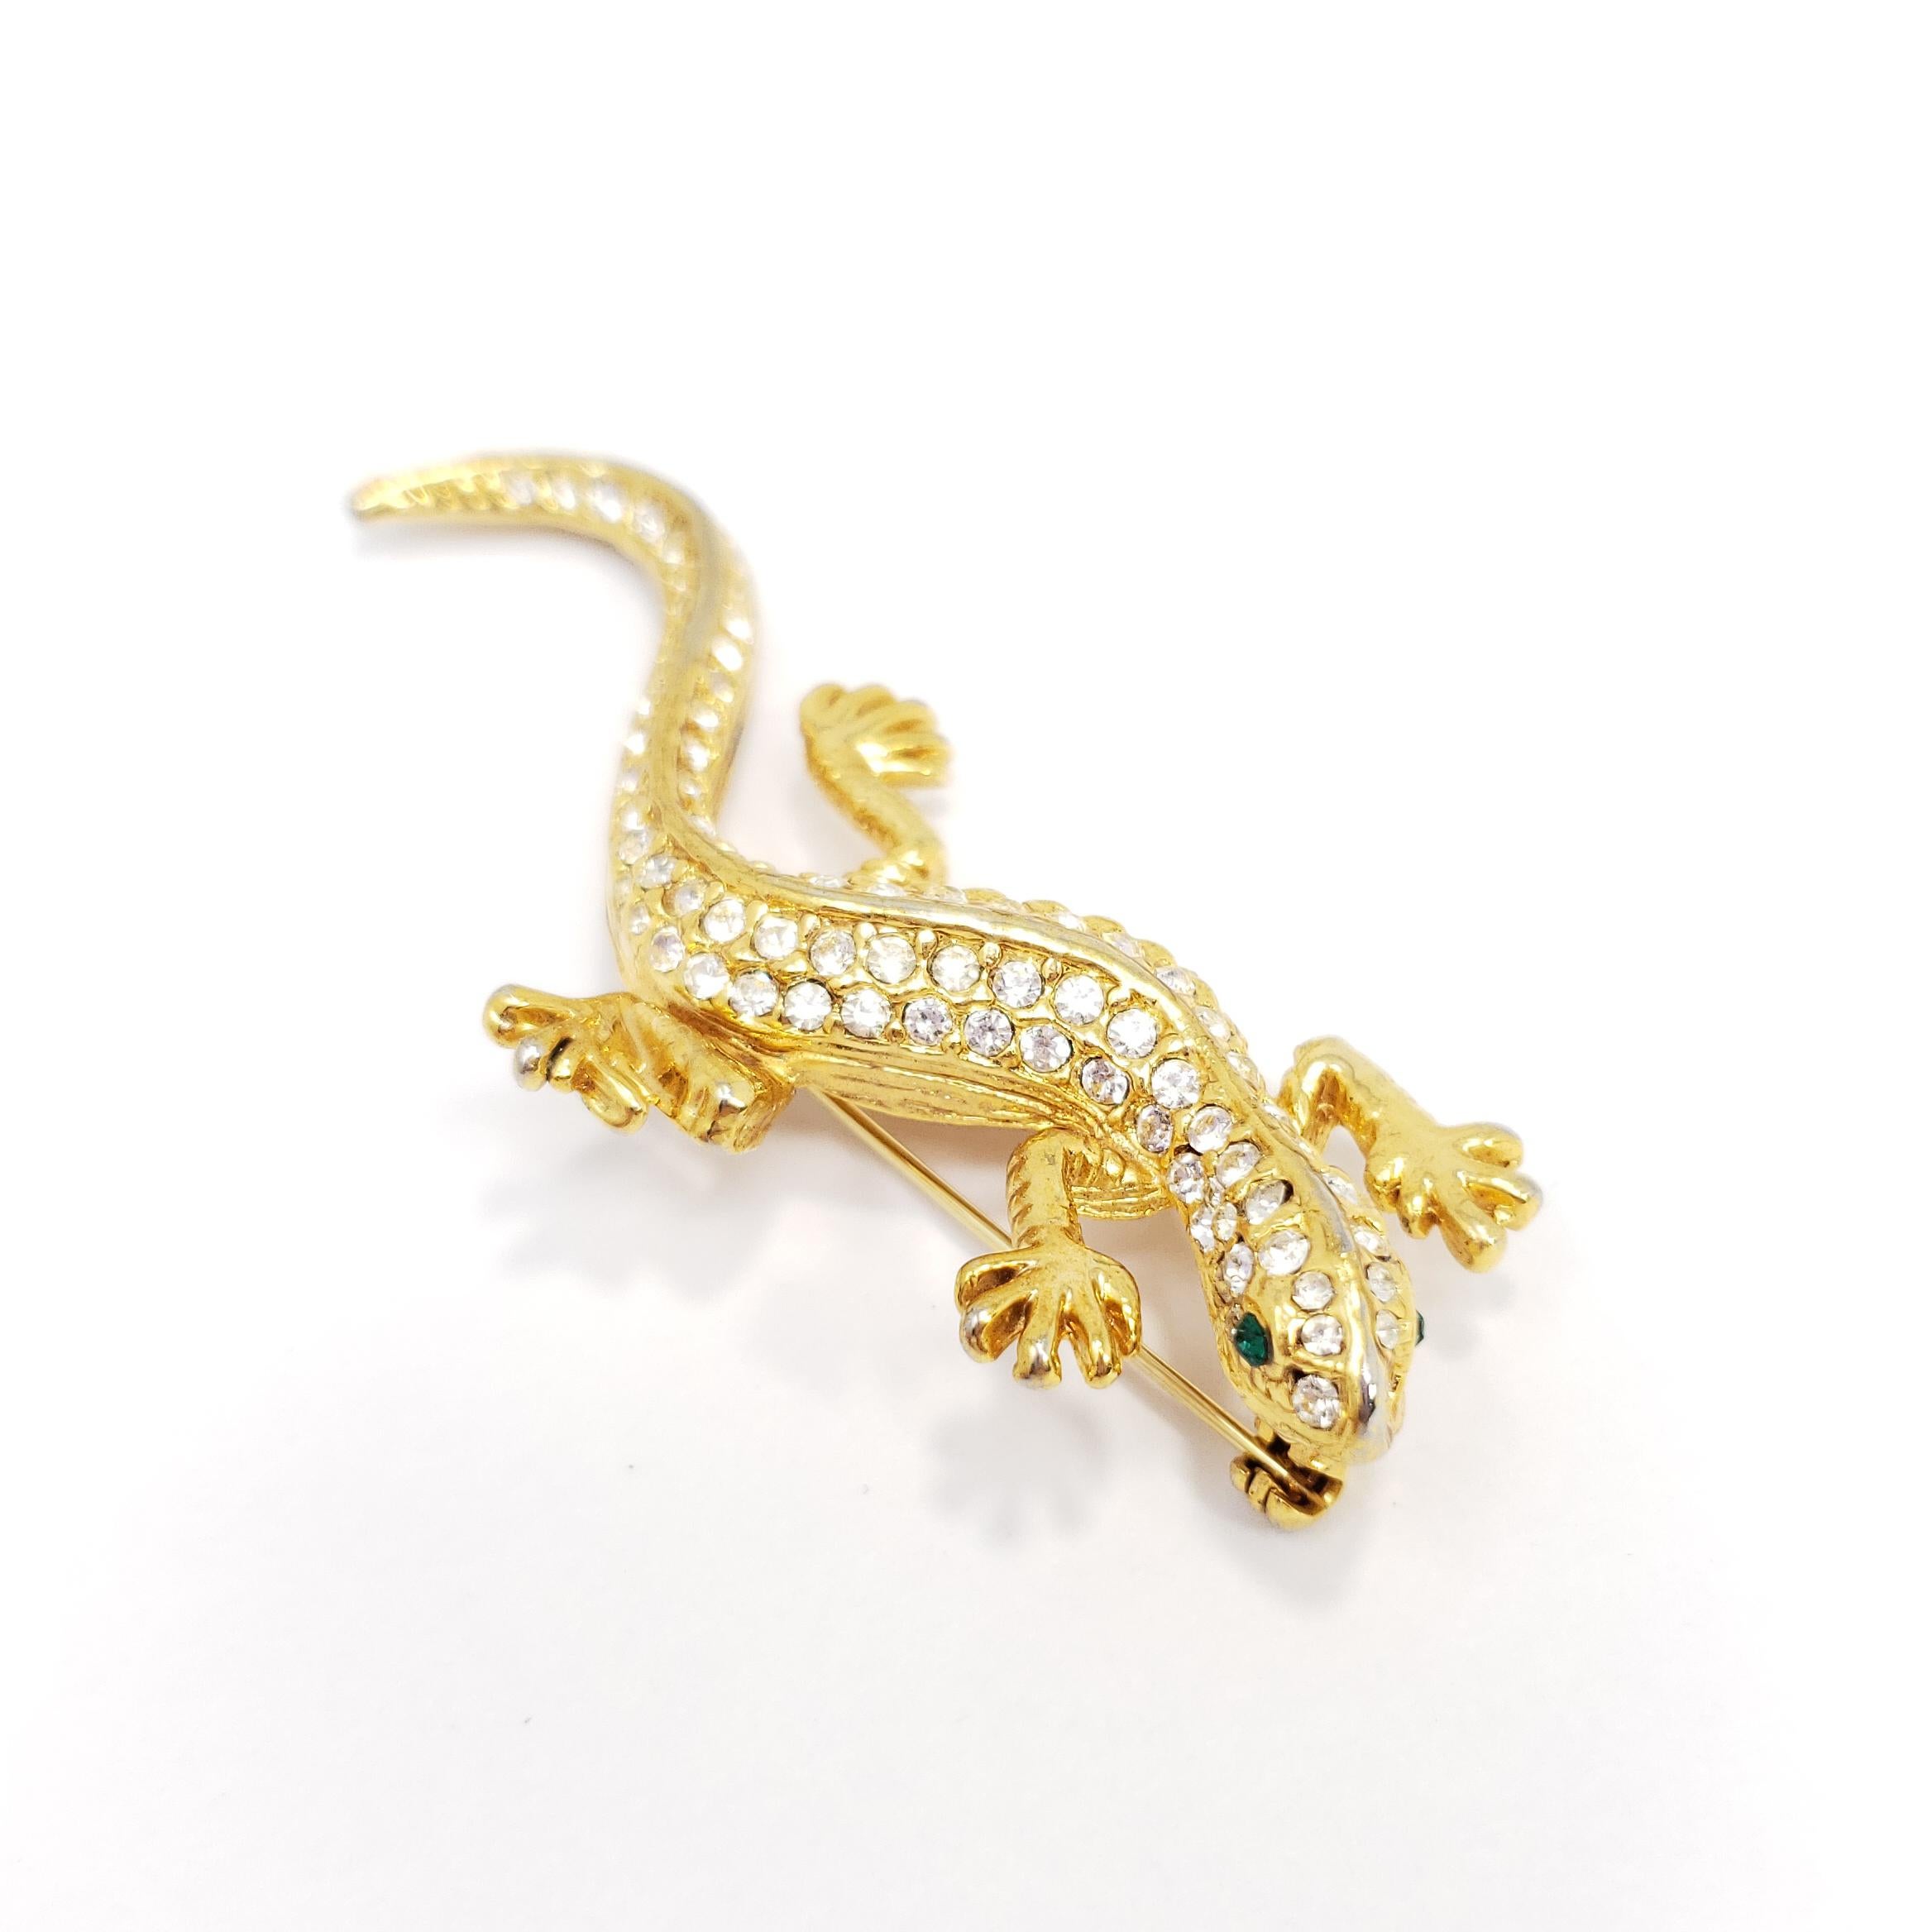 This stylish salamander is decorated with sparkling clear crystals and emerald-colored eyes. A glamorous retro pin brooch with a glowing gold finish!

Marks / hallmarks / etc: USA

A like-new, unworn, vintage piece with high-quality 20th-century